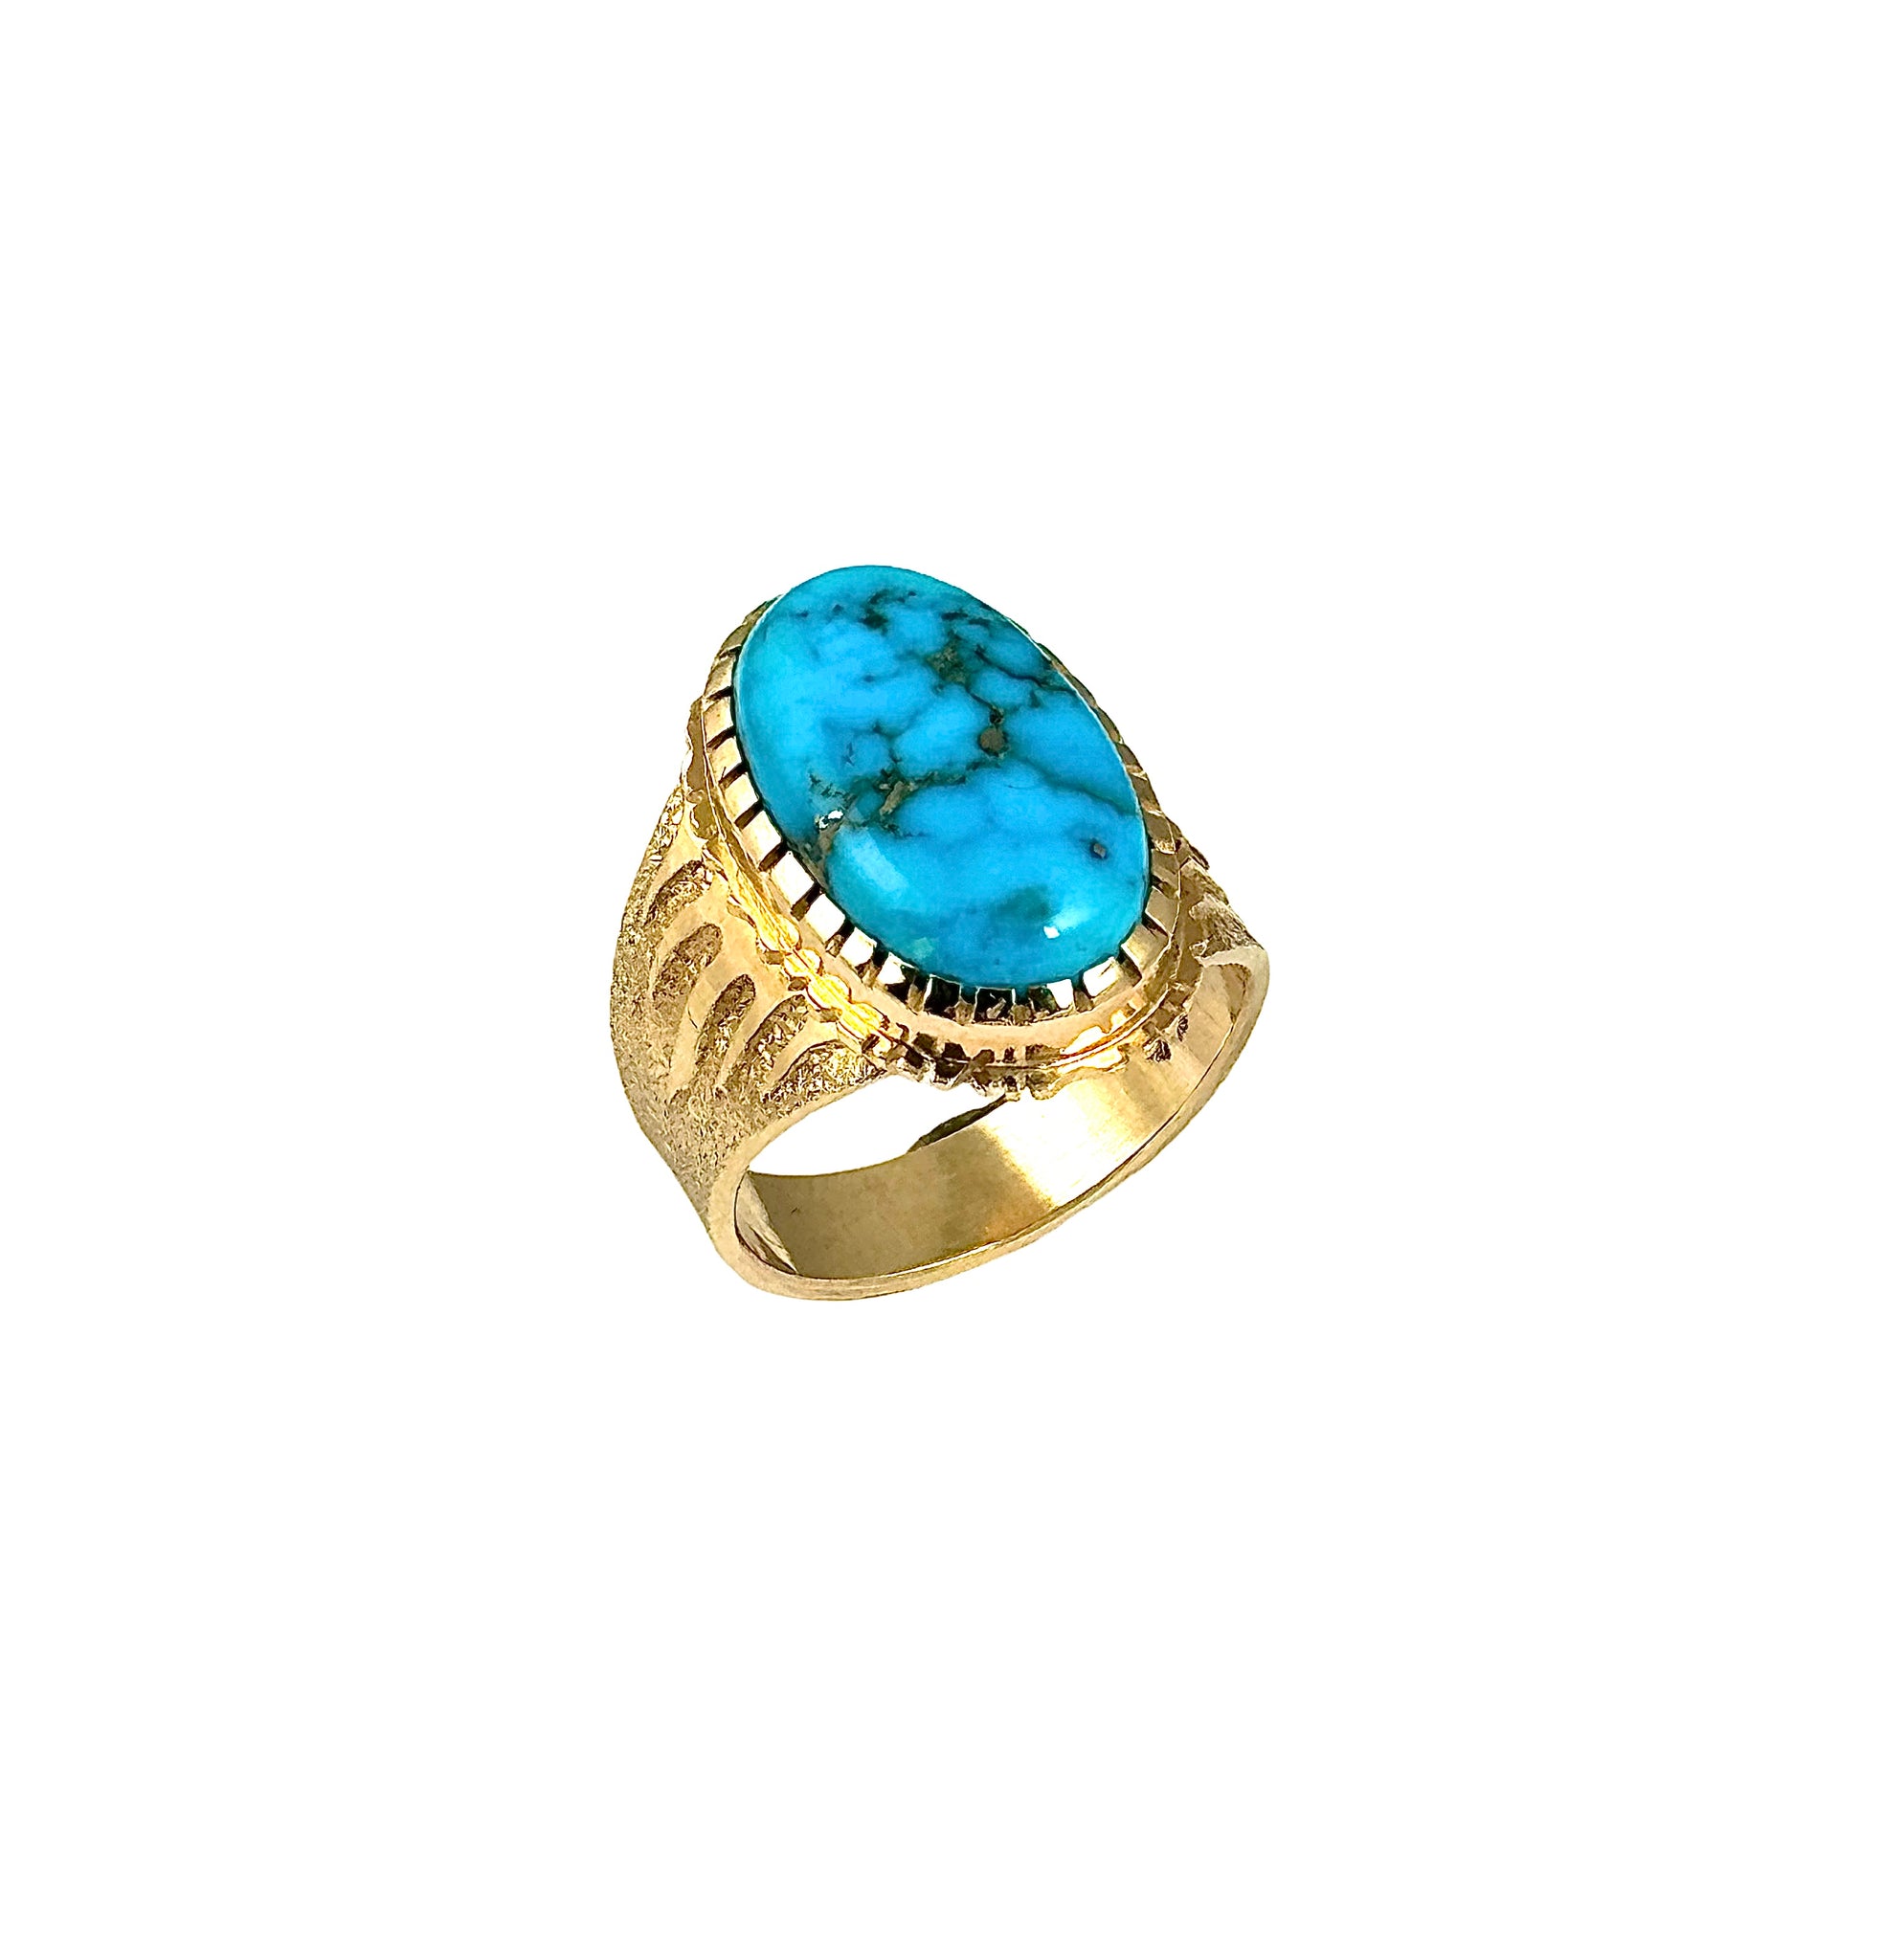 SOLD Ric Charlie Gold Turquoise Ring